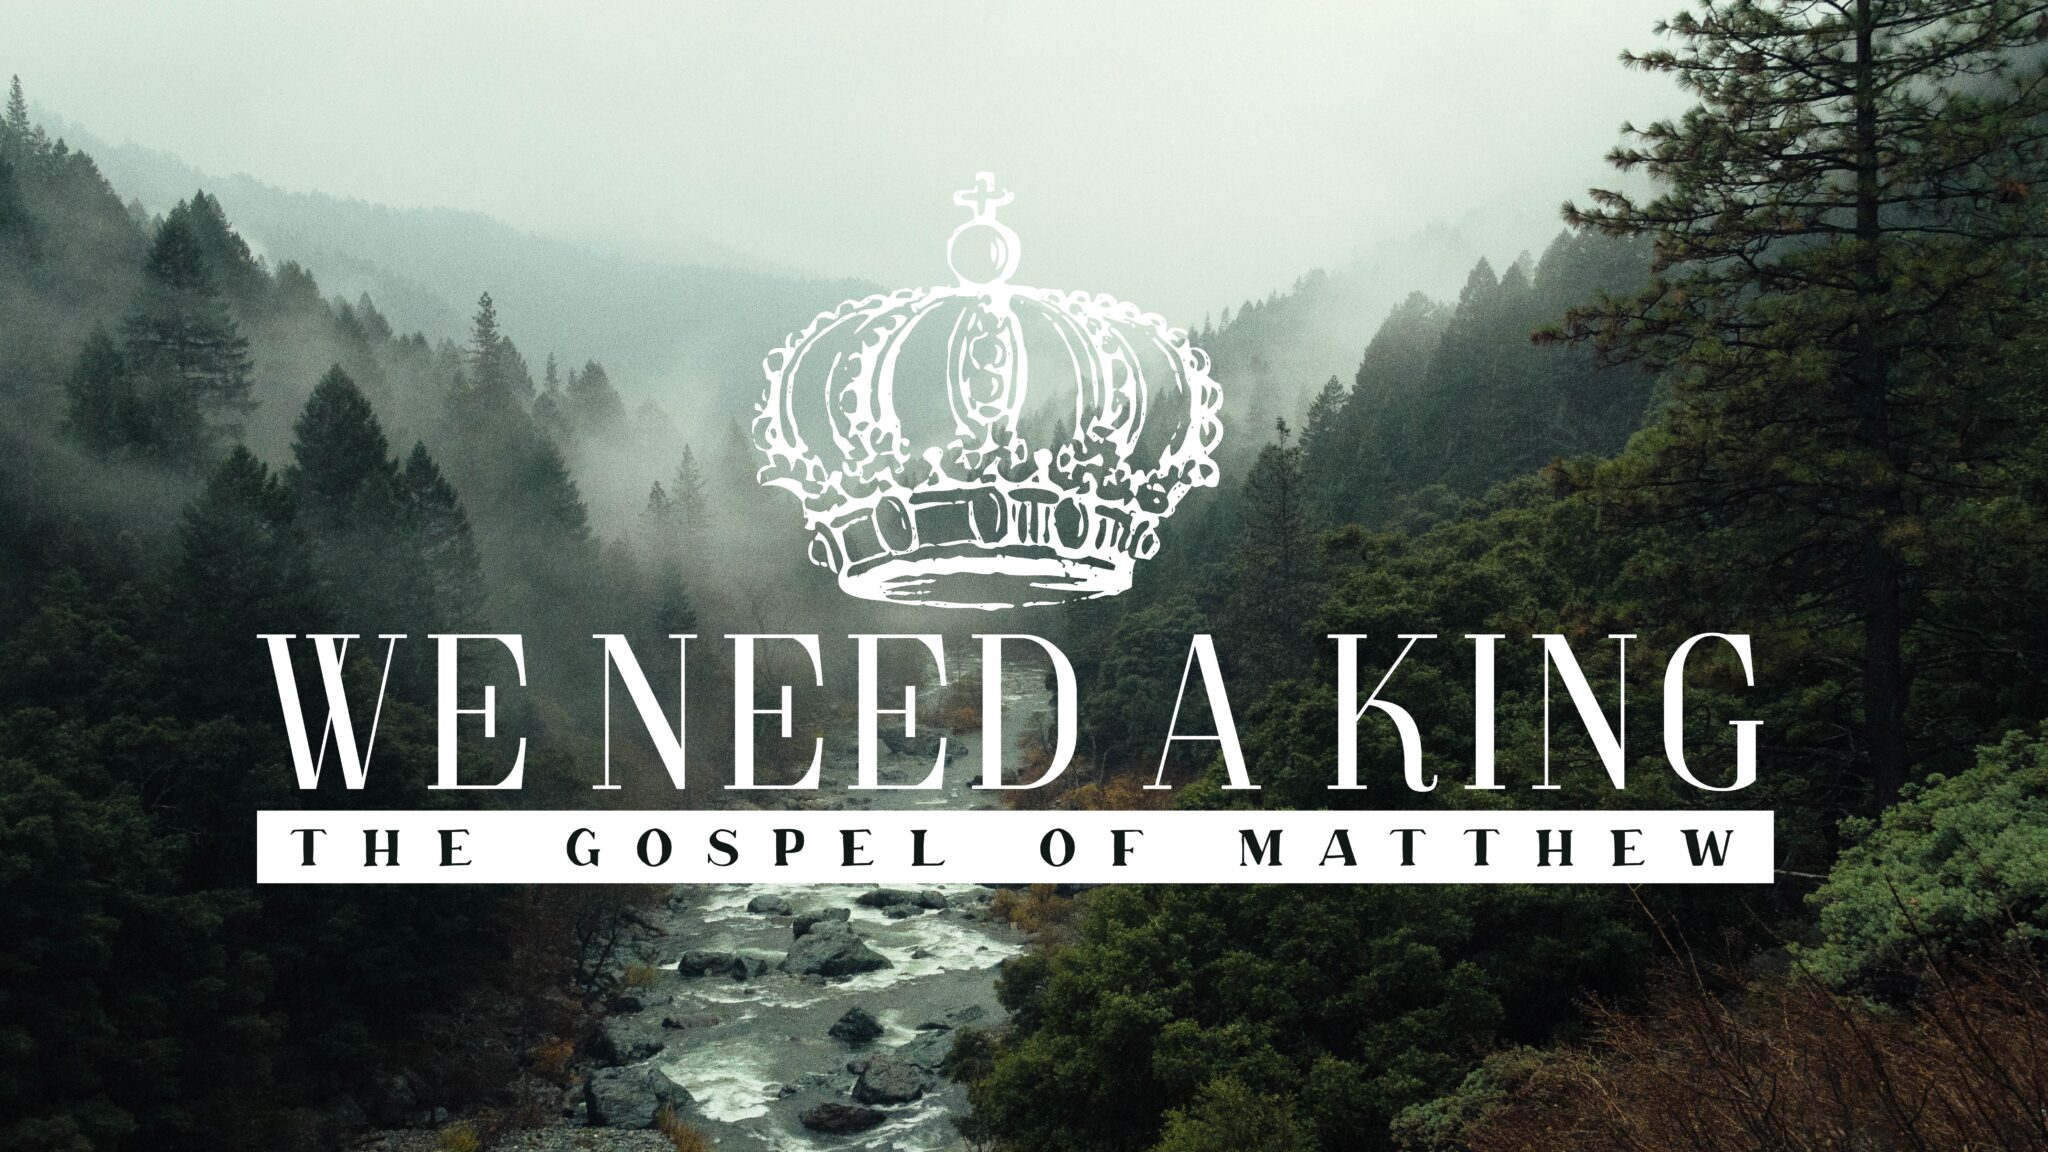 We Need A King the Gospel of Matthew Graphic with a river in the background